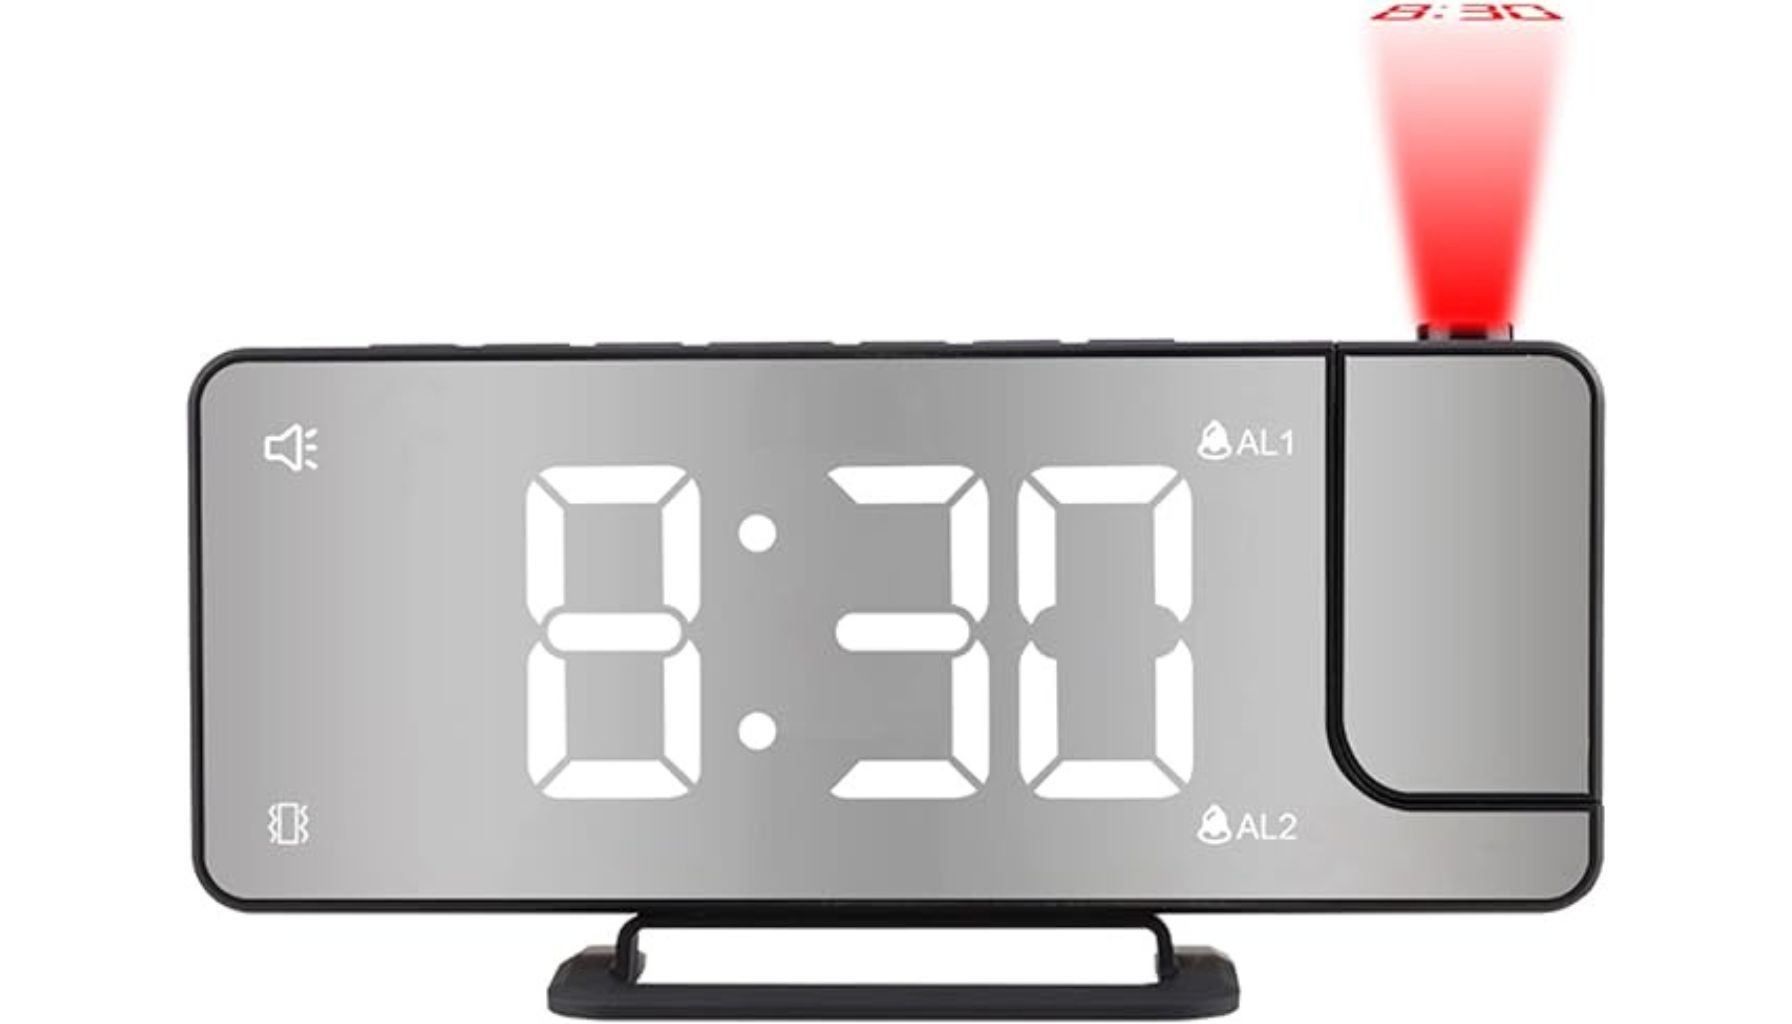 LED Projection Digital Alarm Clock Review